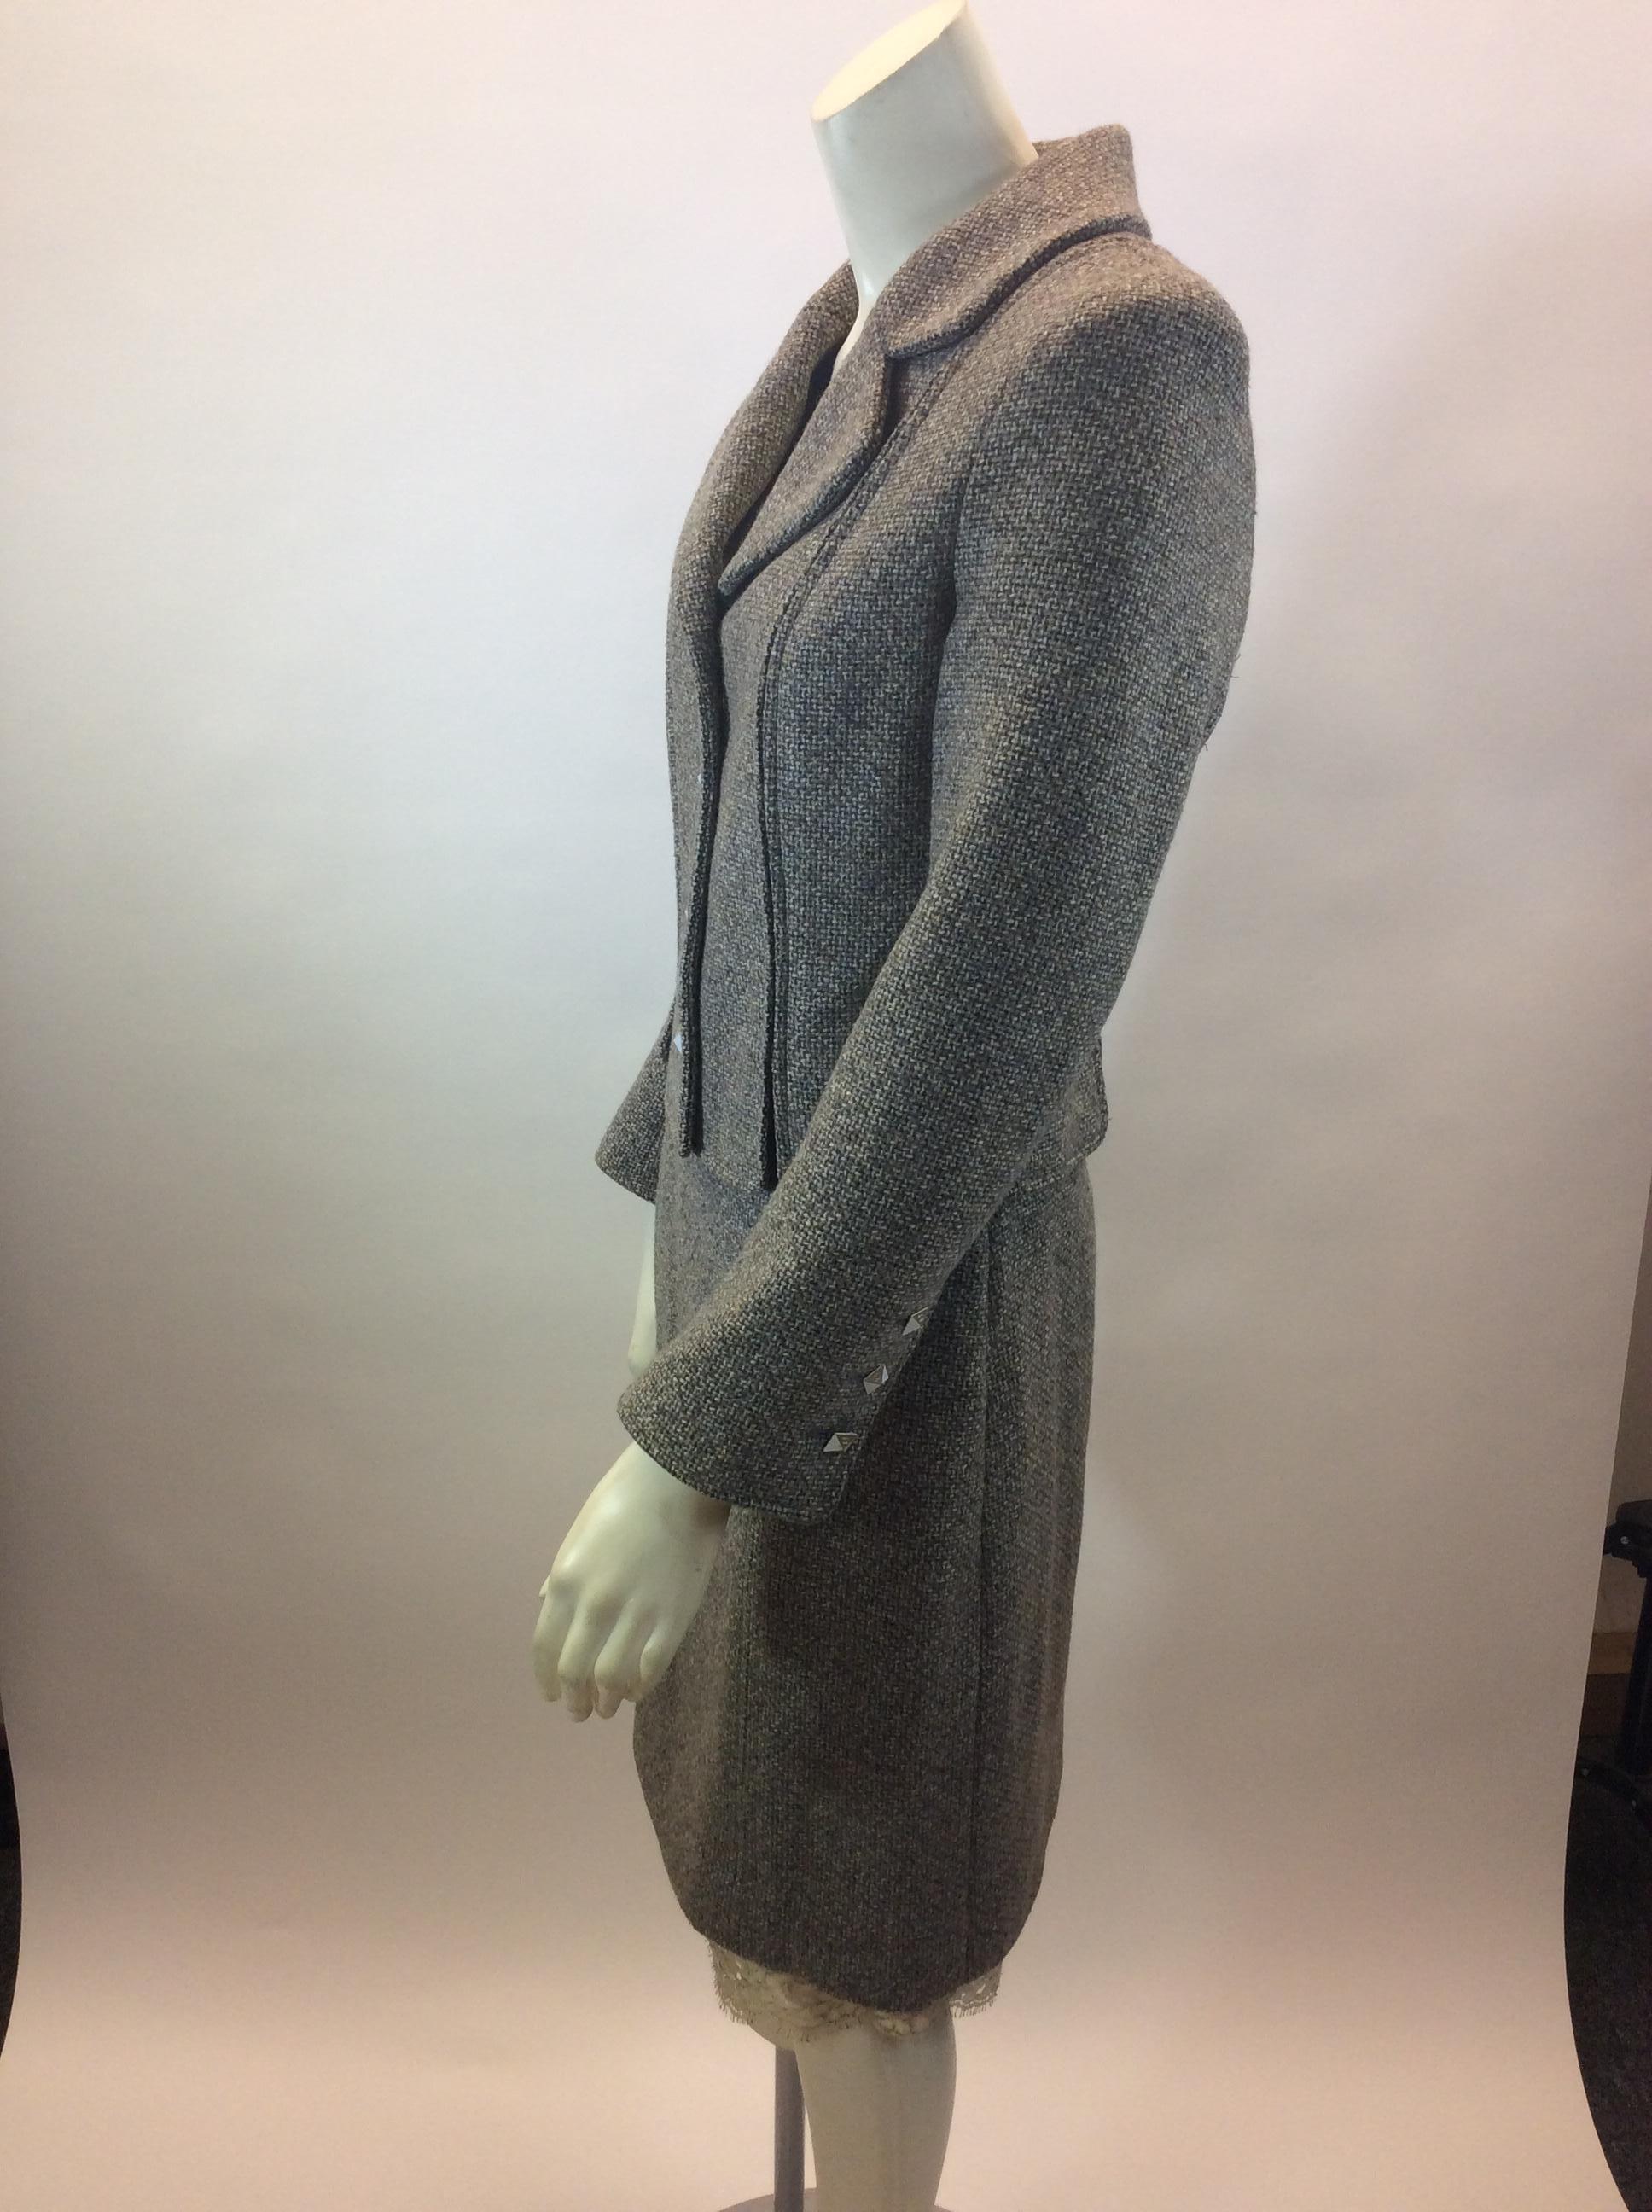 Chanel Grey Tweed Two Piece Skirt Suit
$425
Made in France
100% Wool
Size 38
Jacket:
Length 19